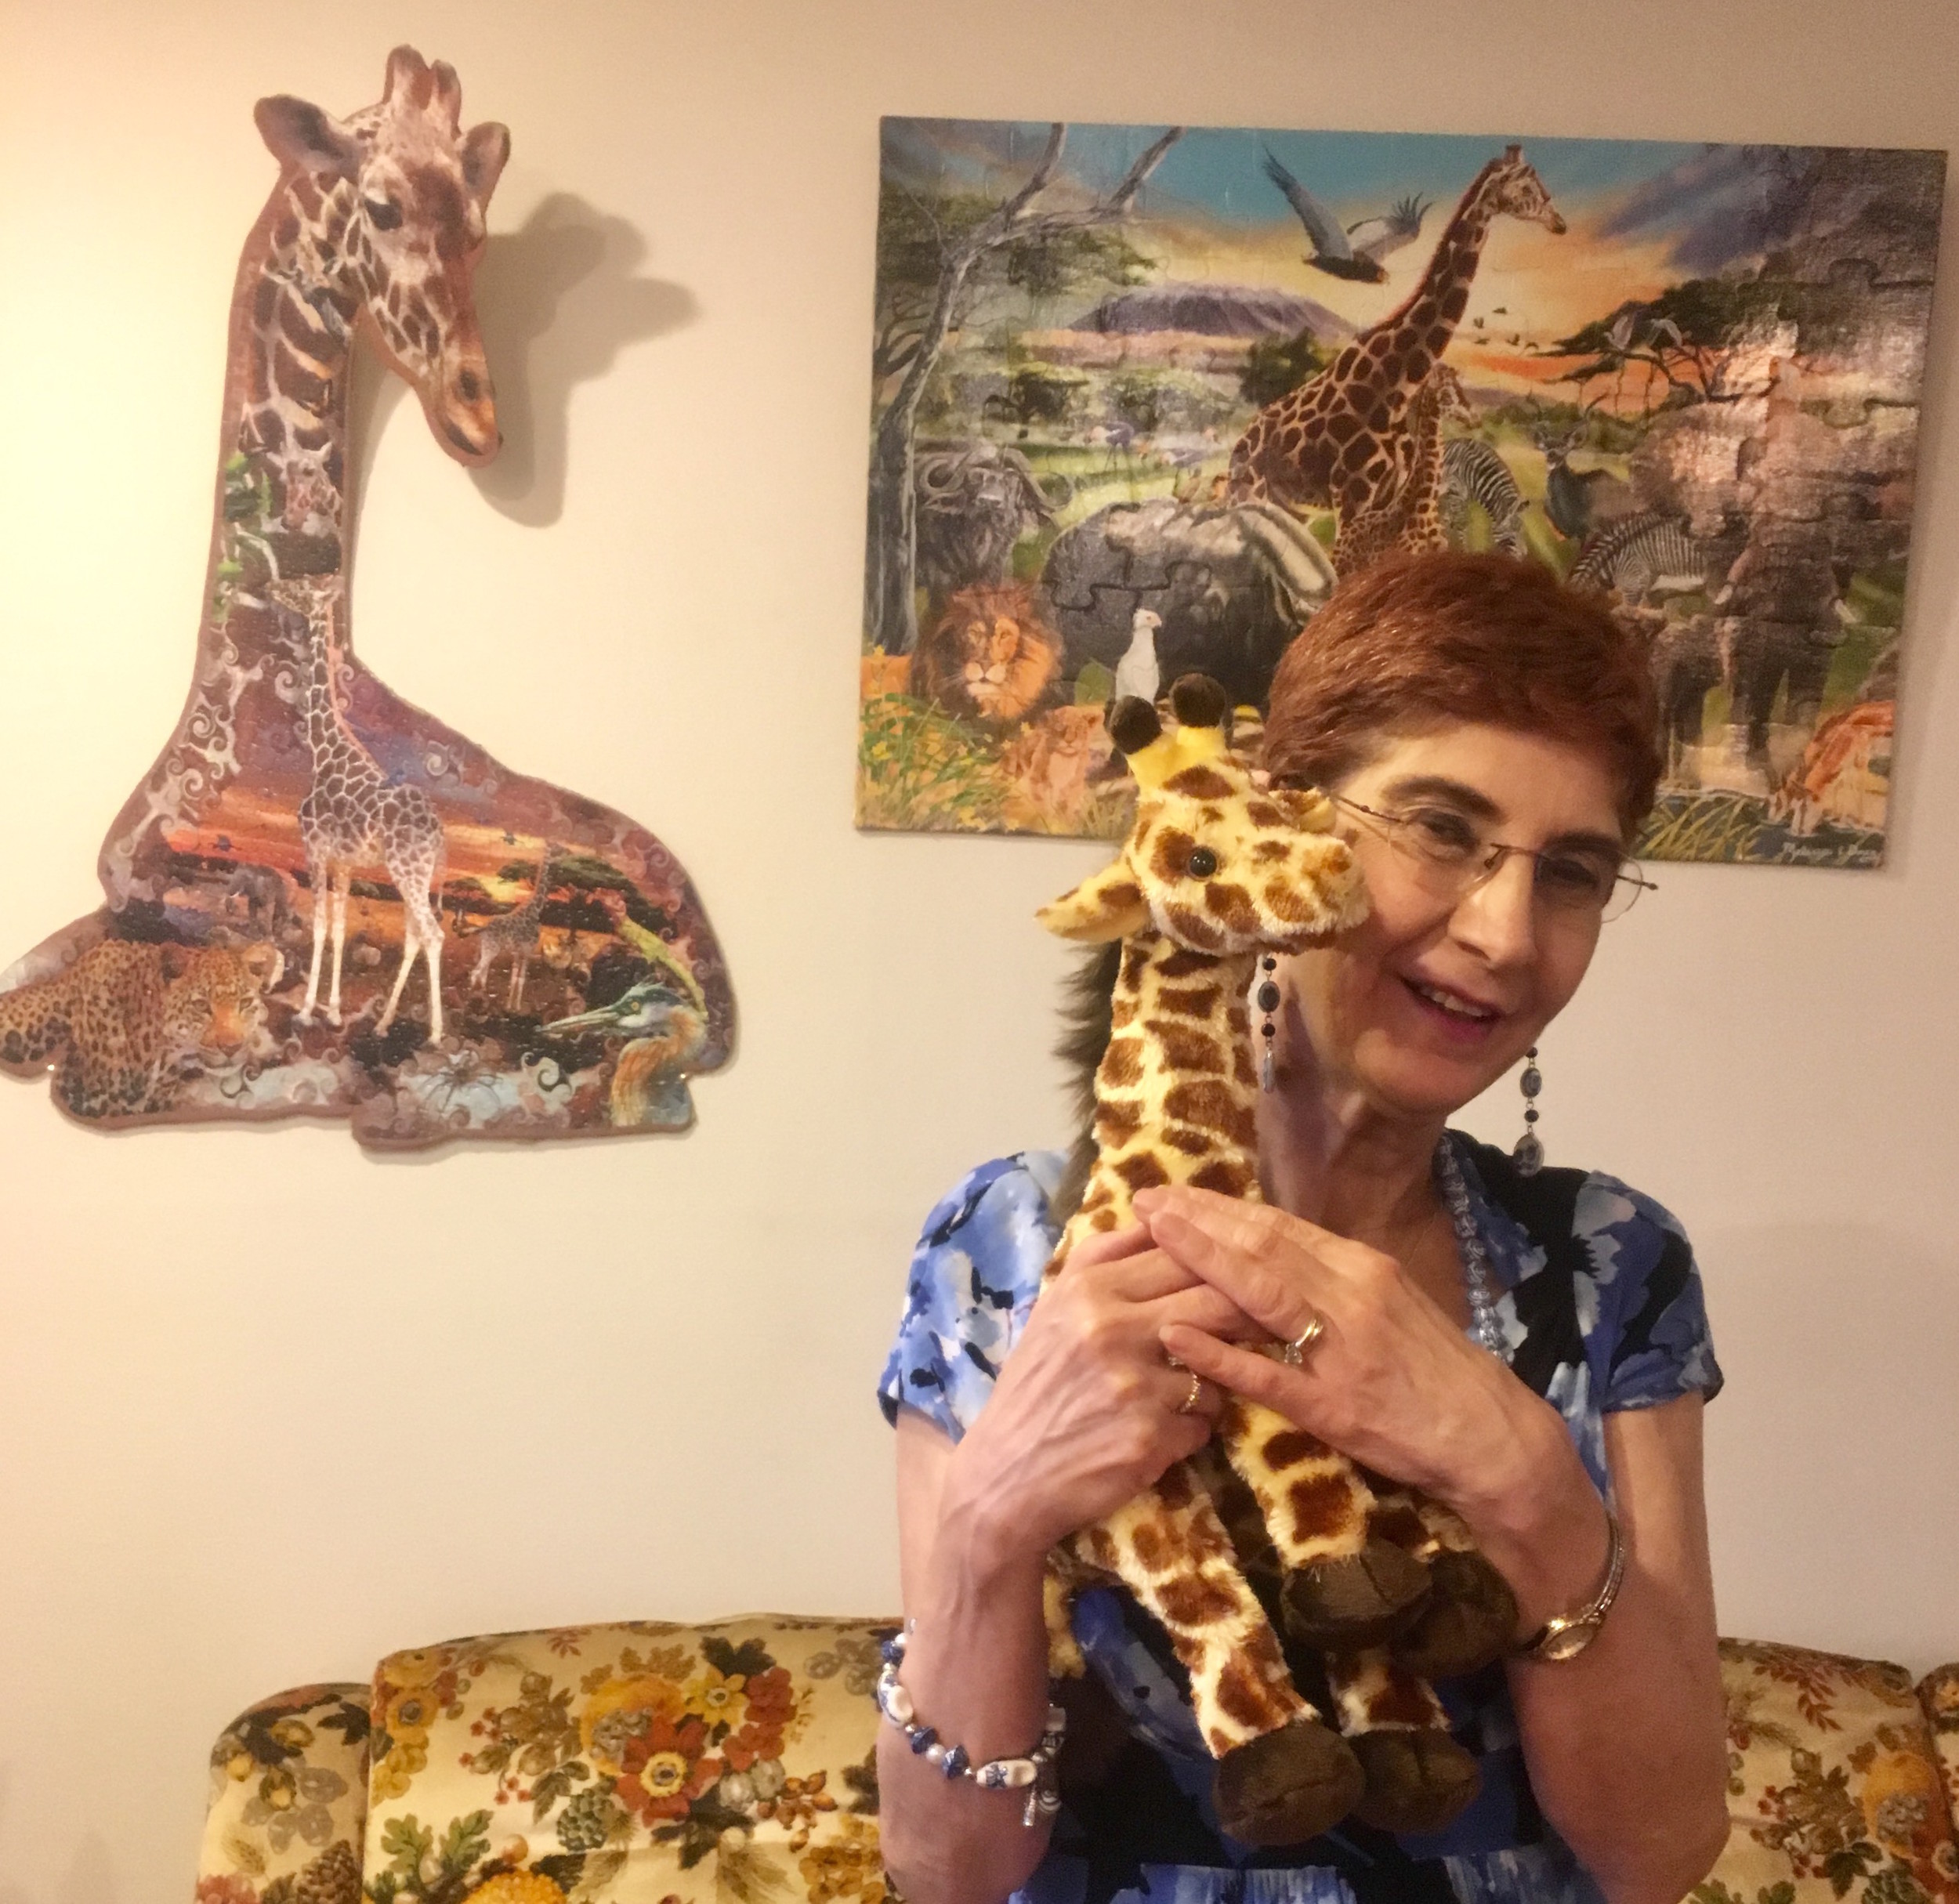 Renée Susman, 63, of Wantagh, has collected more than 500 giraffe-themed items.